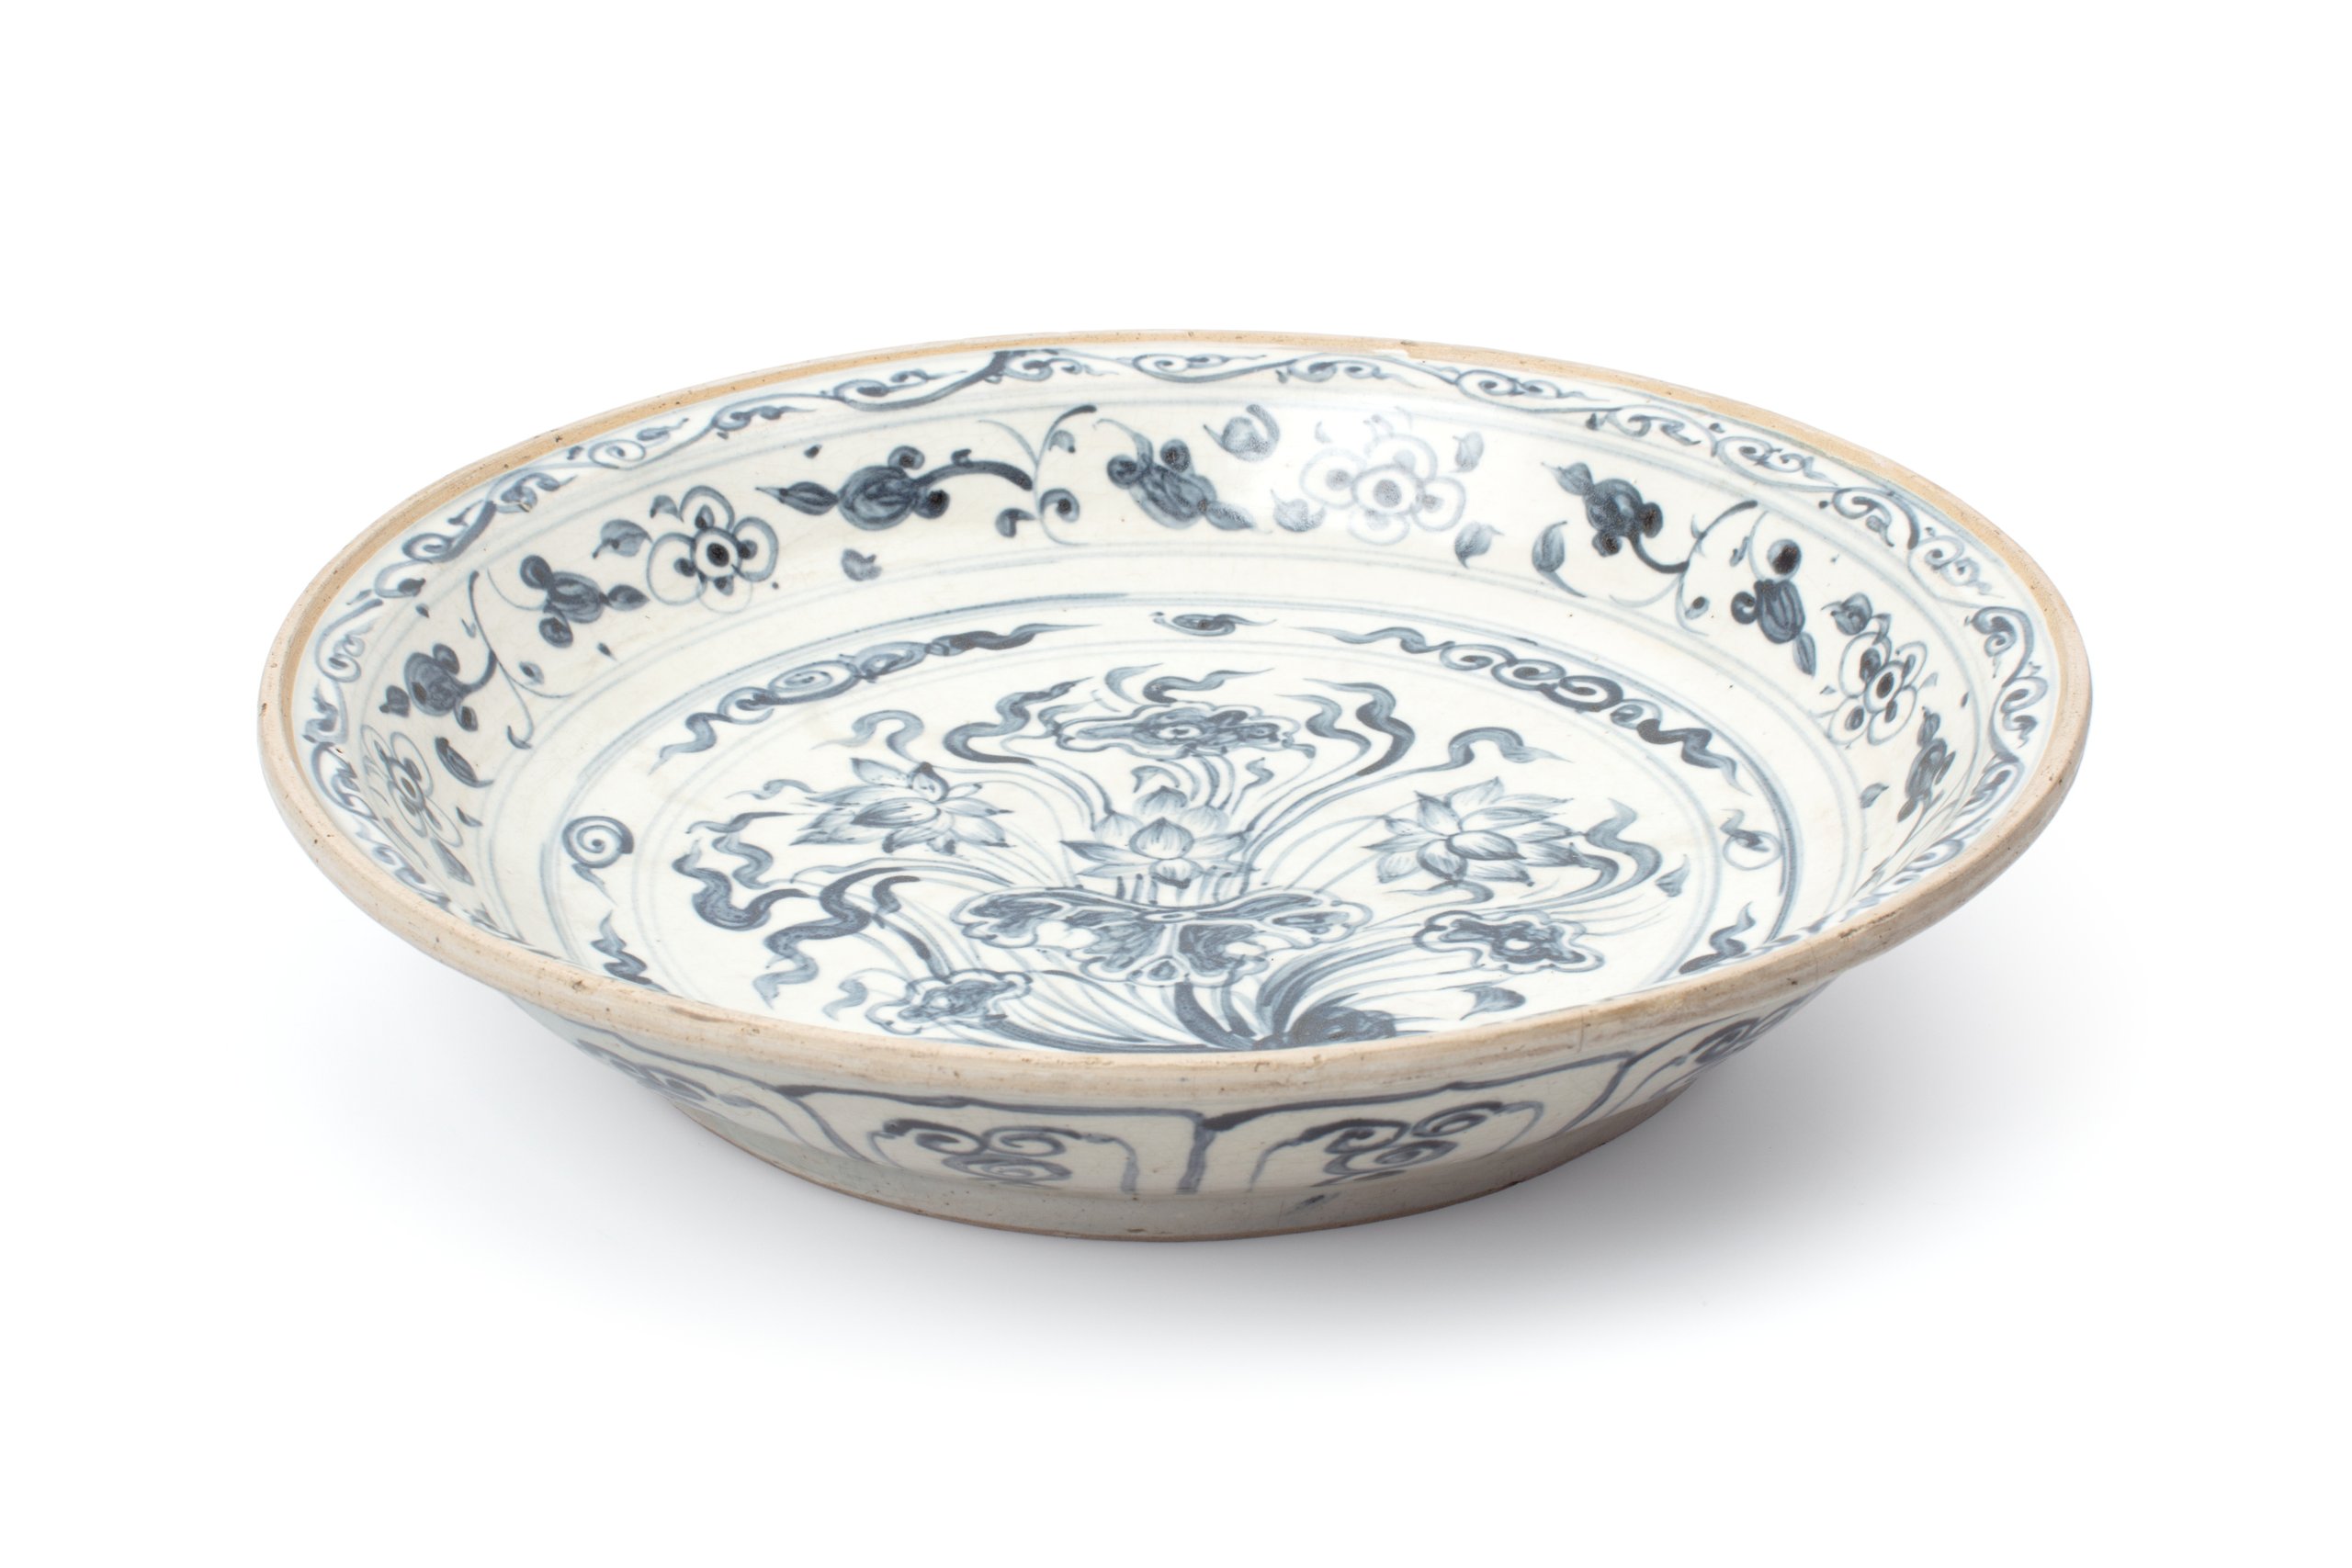 Annamese dish with floral design